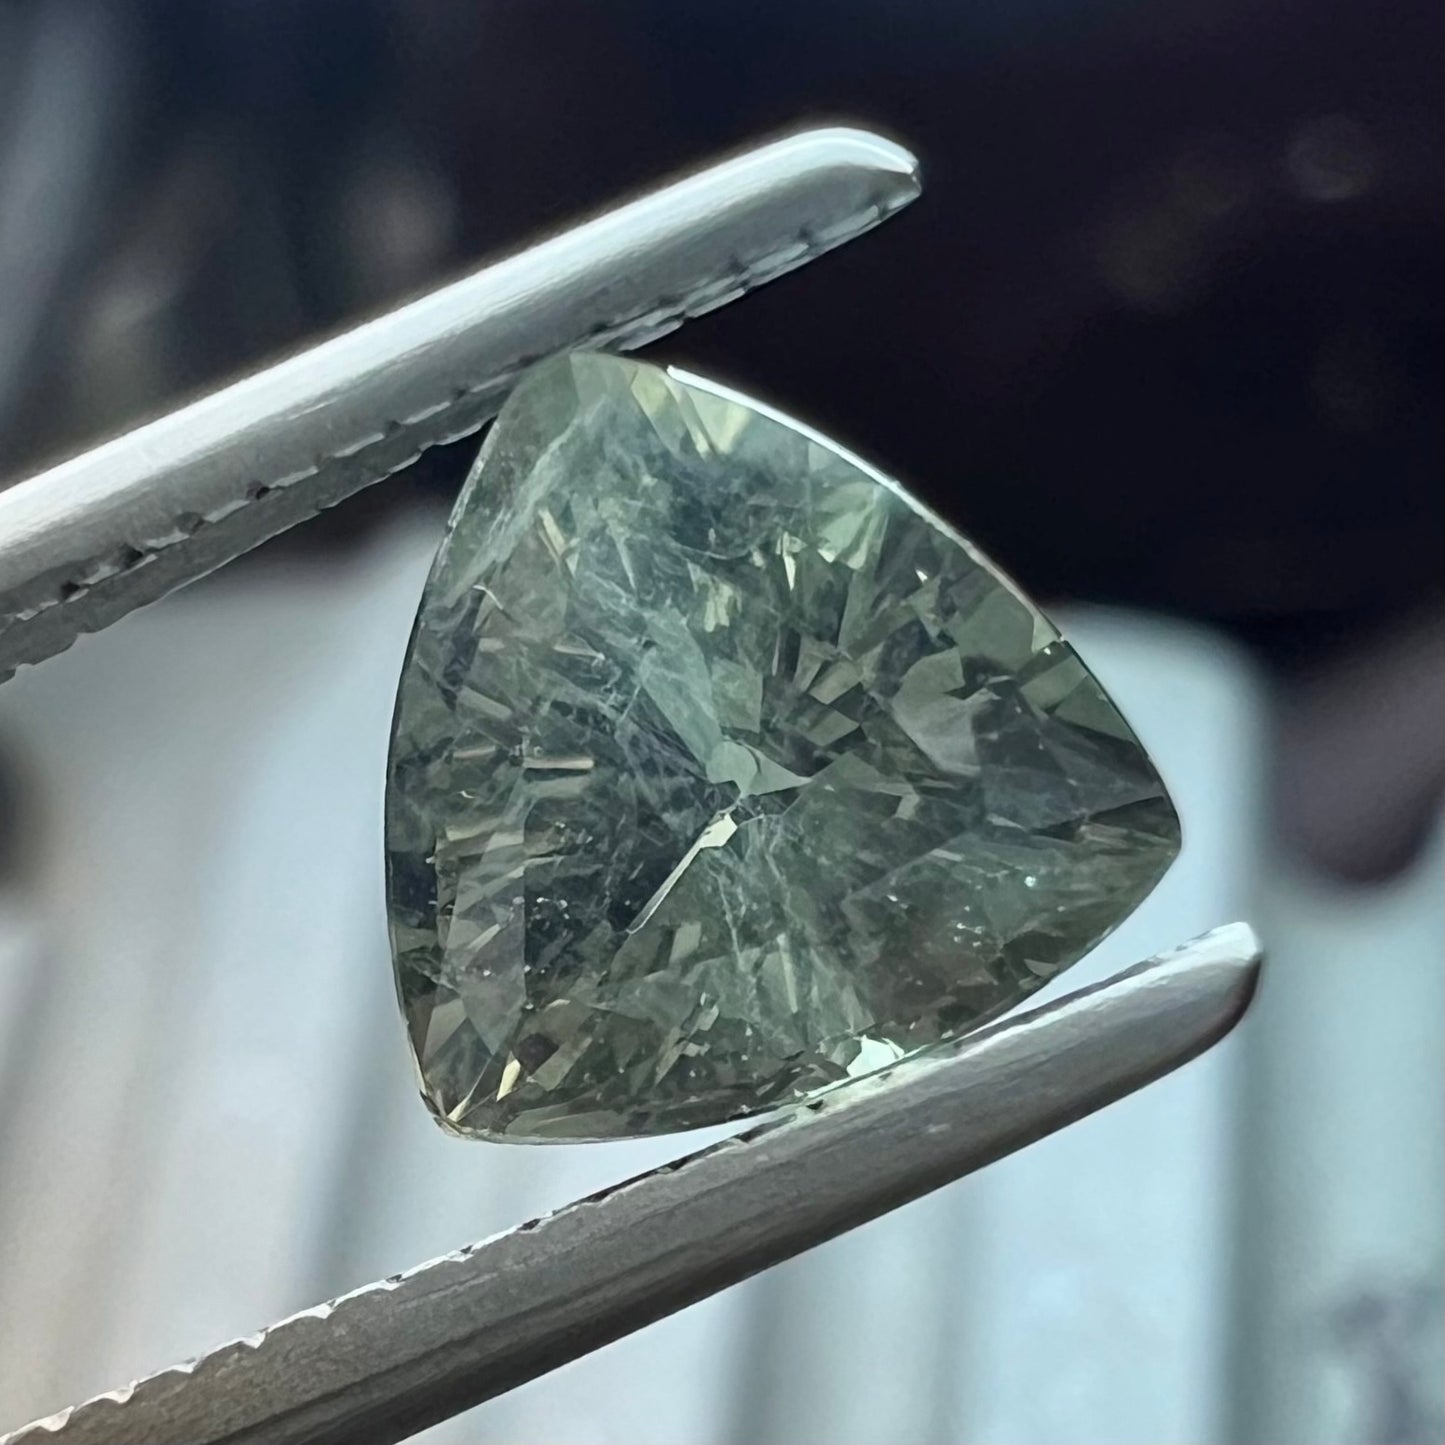 A natural, 1.10 carat, trillion cut alexandrite gemstone.  The stone changes colors from dark olive green to faint purplish green.